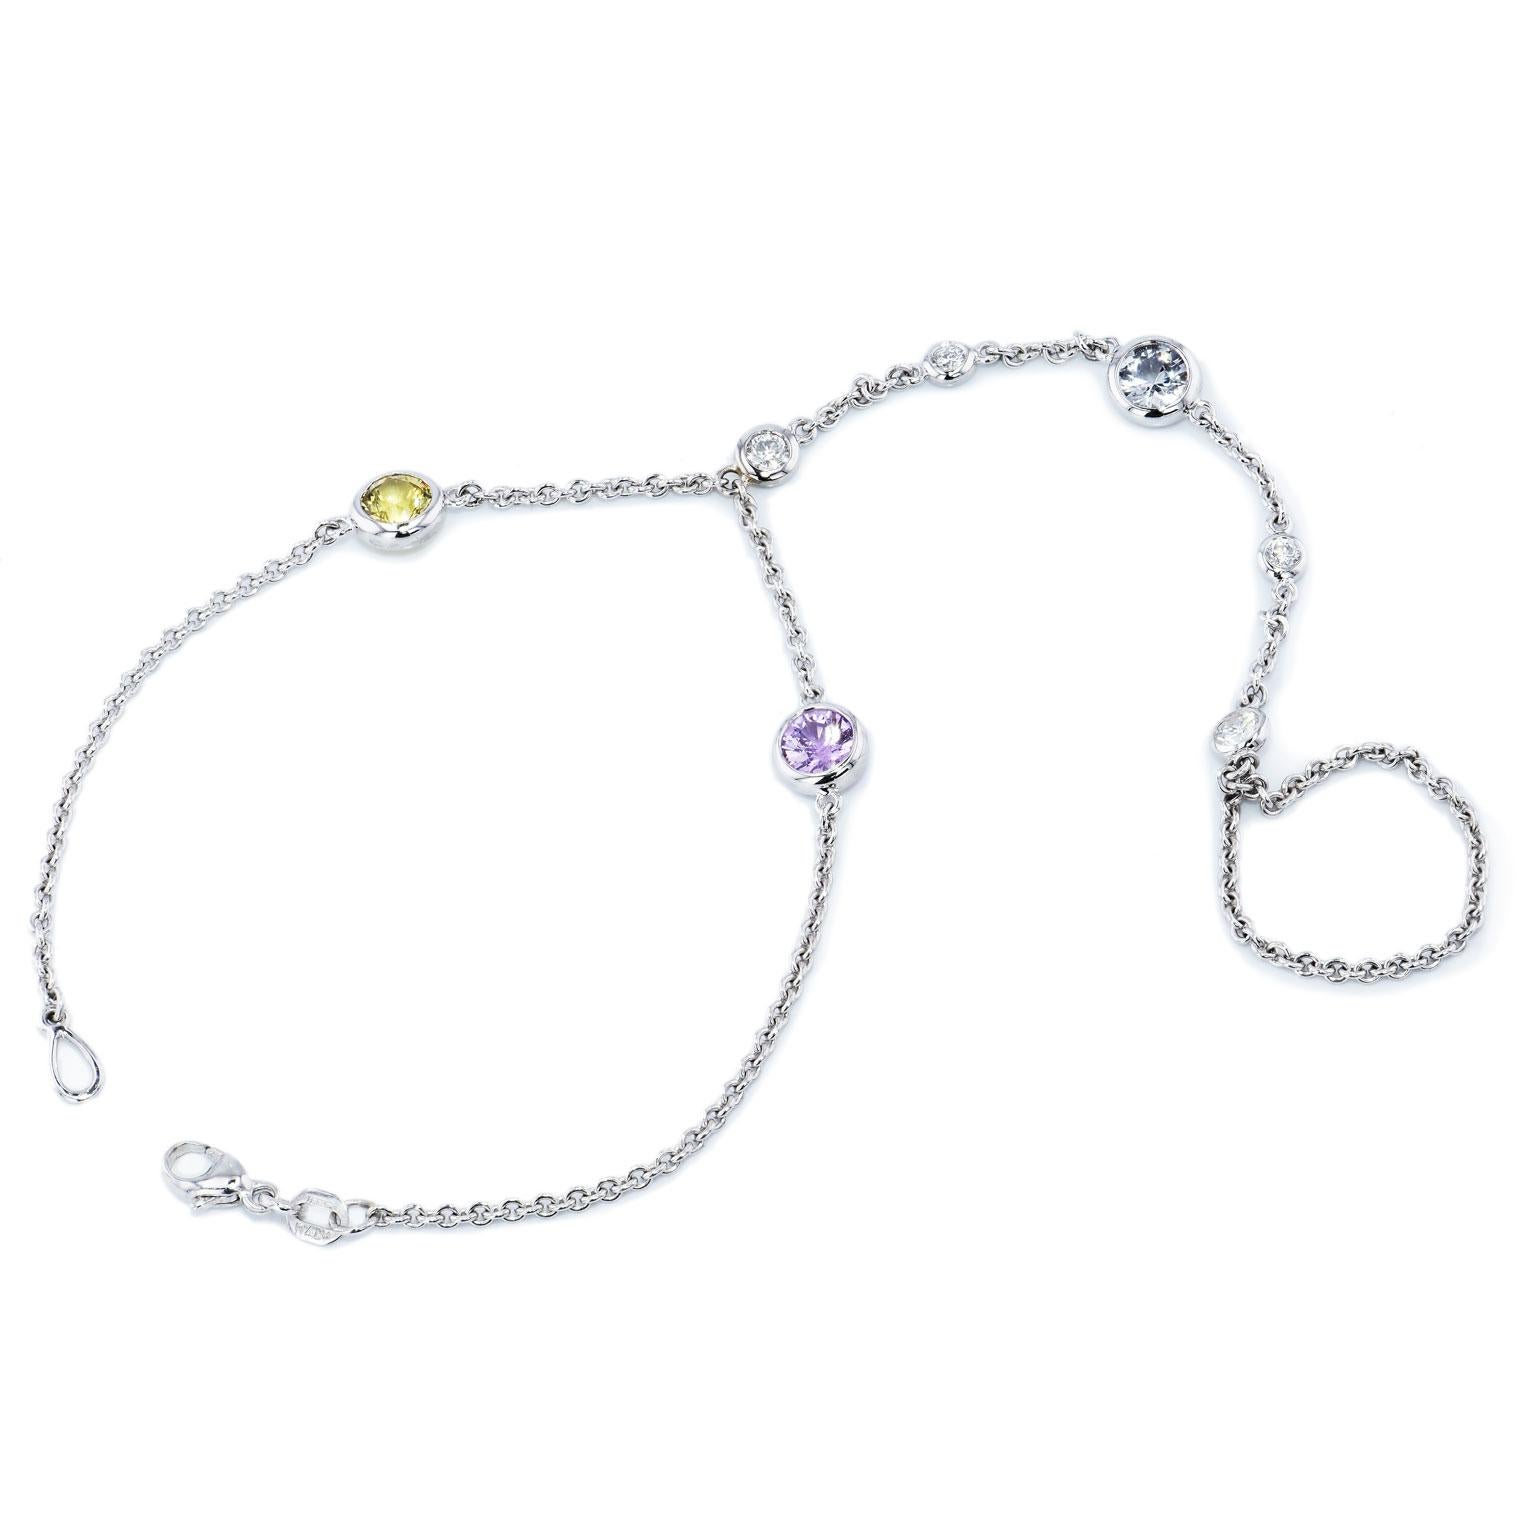 Let the beauty of this lariat bracelet capture you, with 18 karat white gold bezel stations featuring three sapphire stones (2.22 carats in total weight in white, yellow, and pink) and 0.46 carats in total weight of diamonds (G-H/VS1).